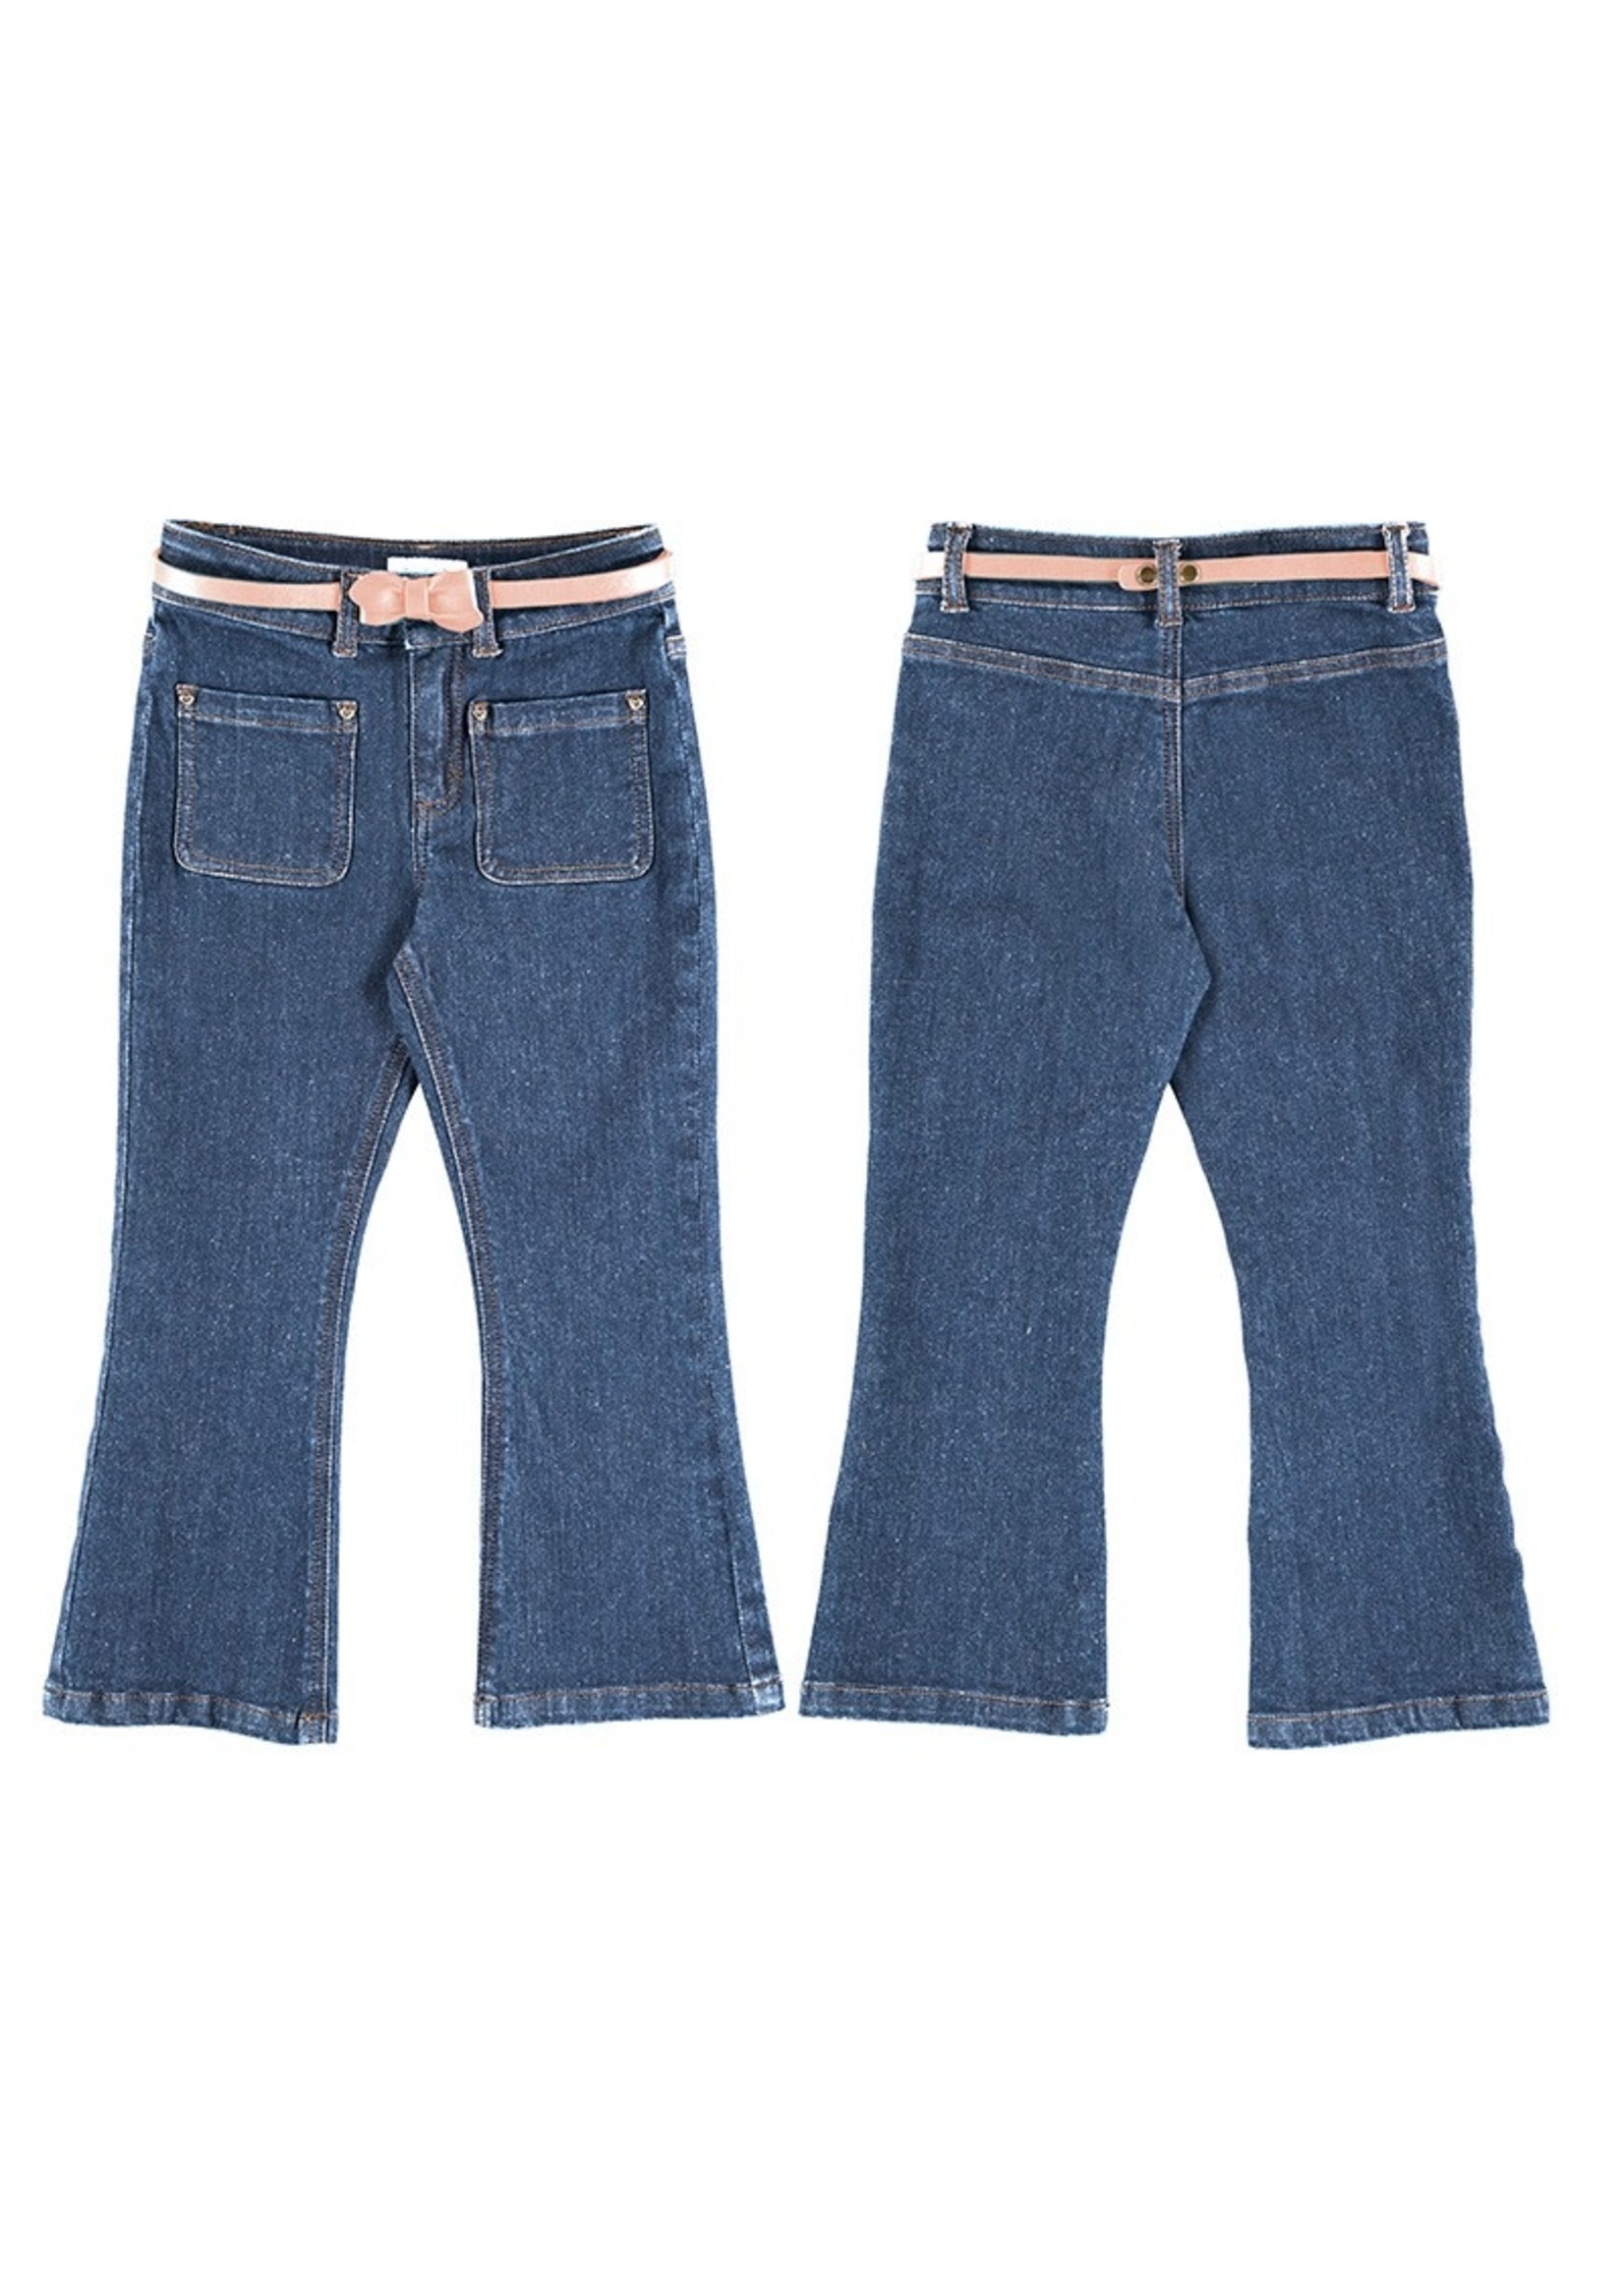 Mayoral Flare Jeans w Pink Bow Belt